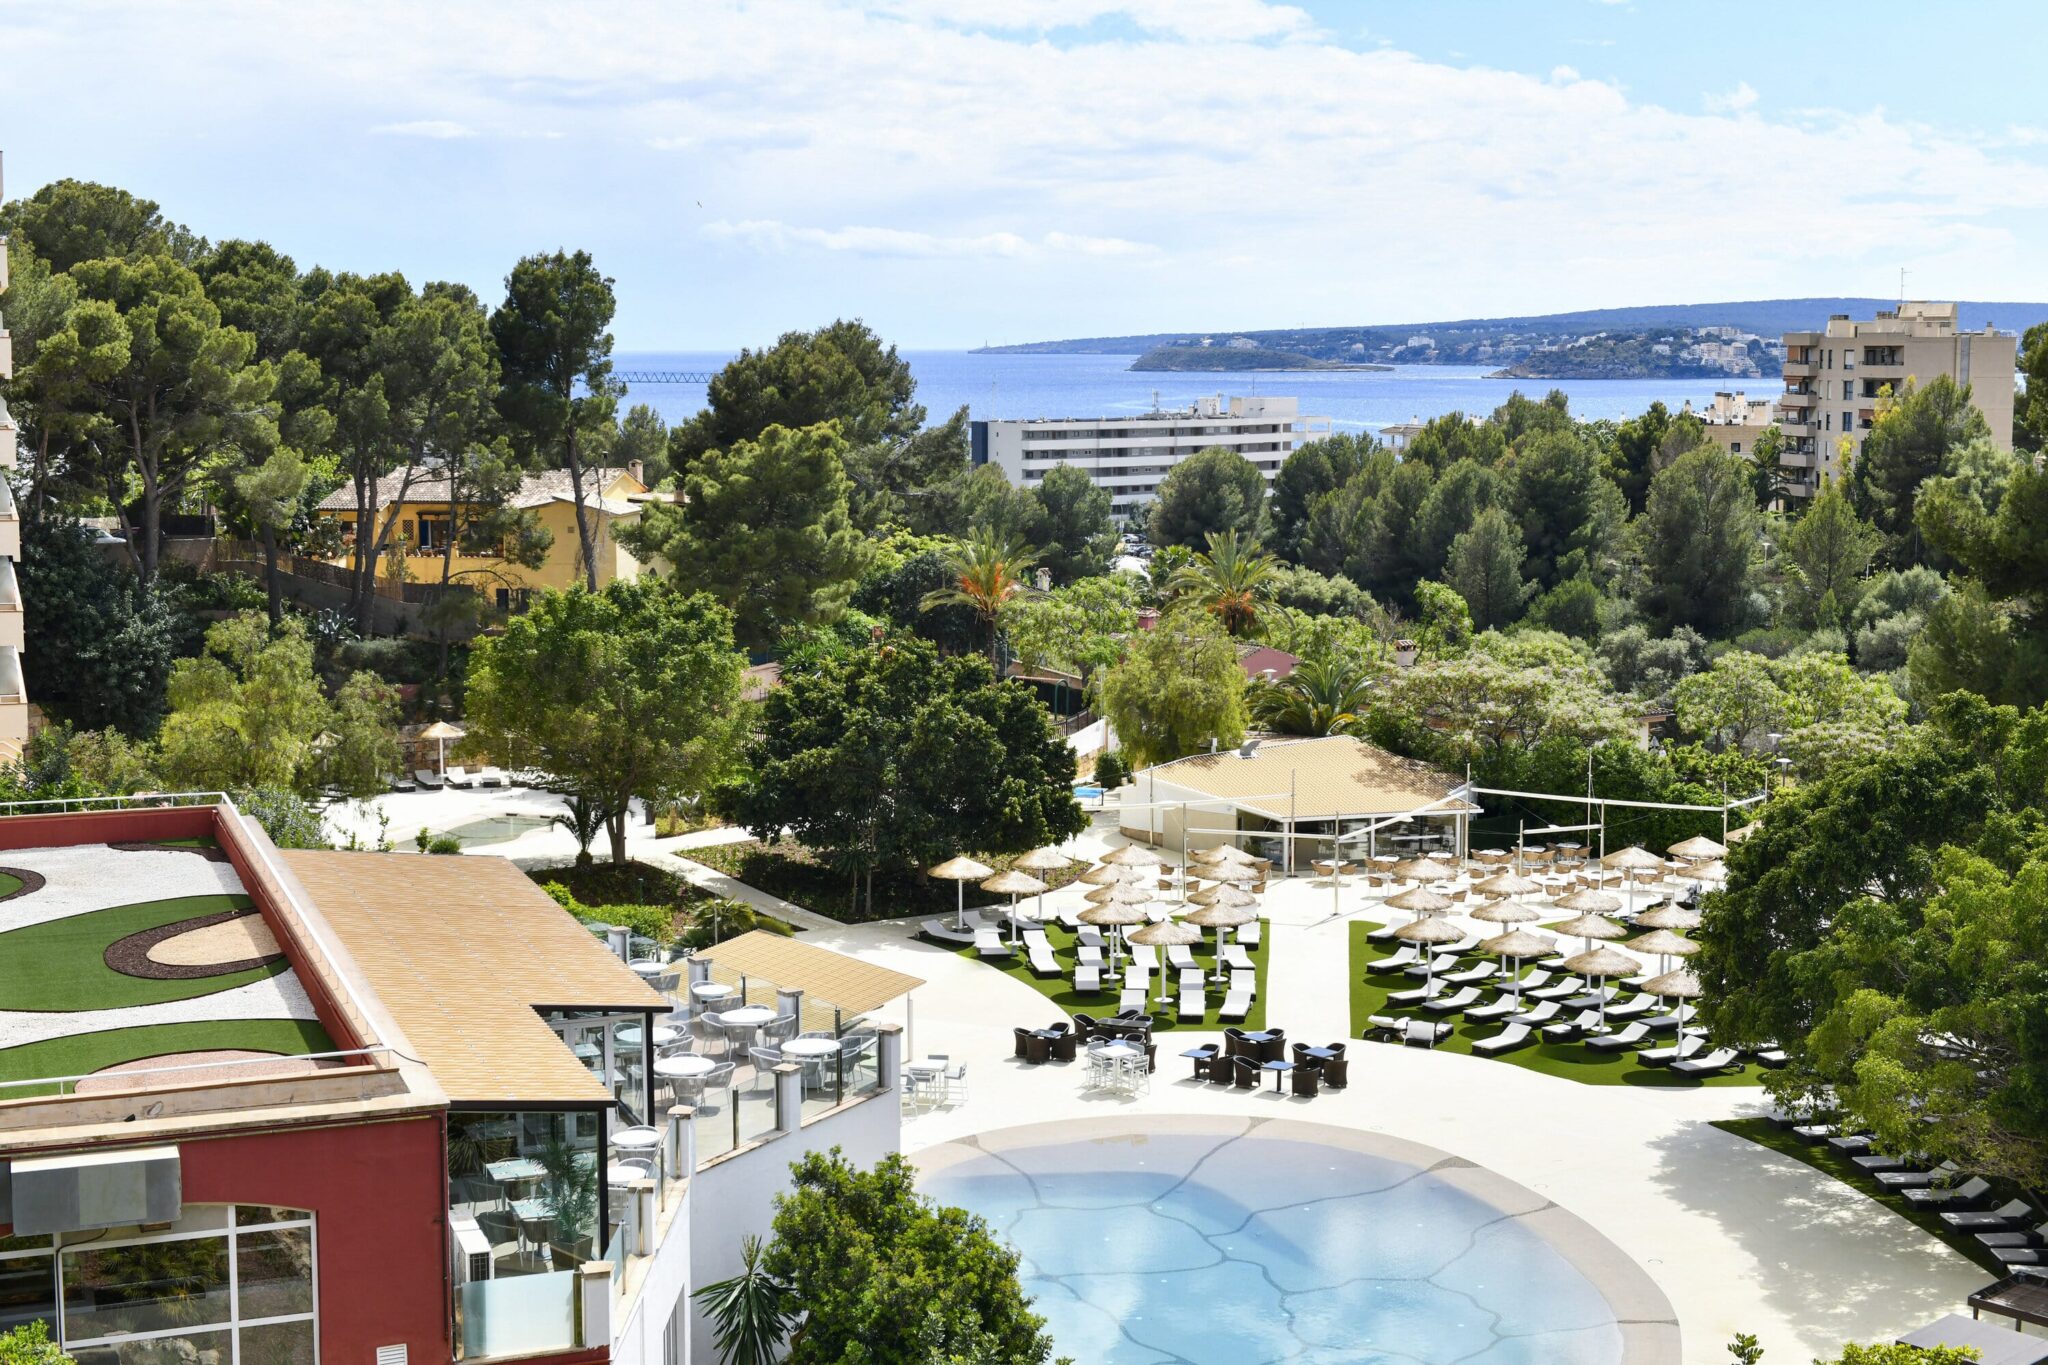 Book your next golf break to Mallorca with the impeccable sea views from Hotel Marina Portals.